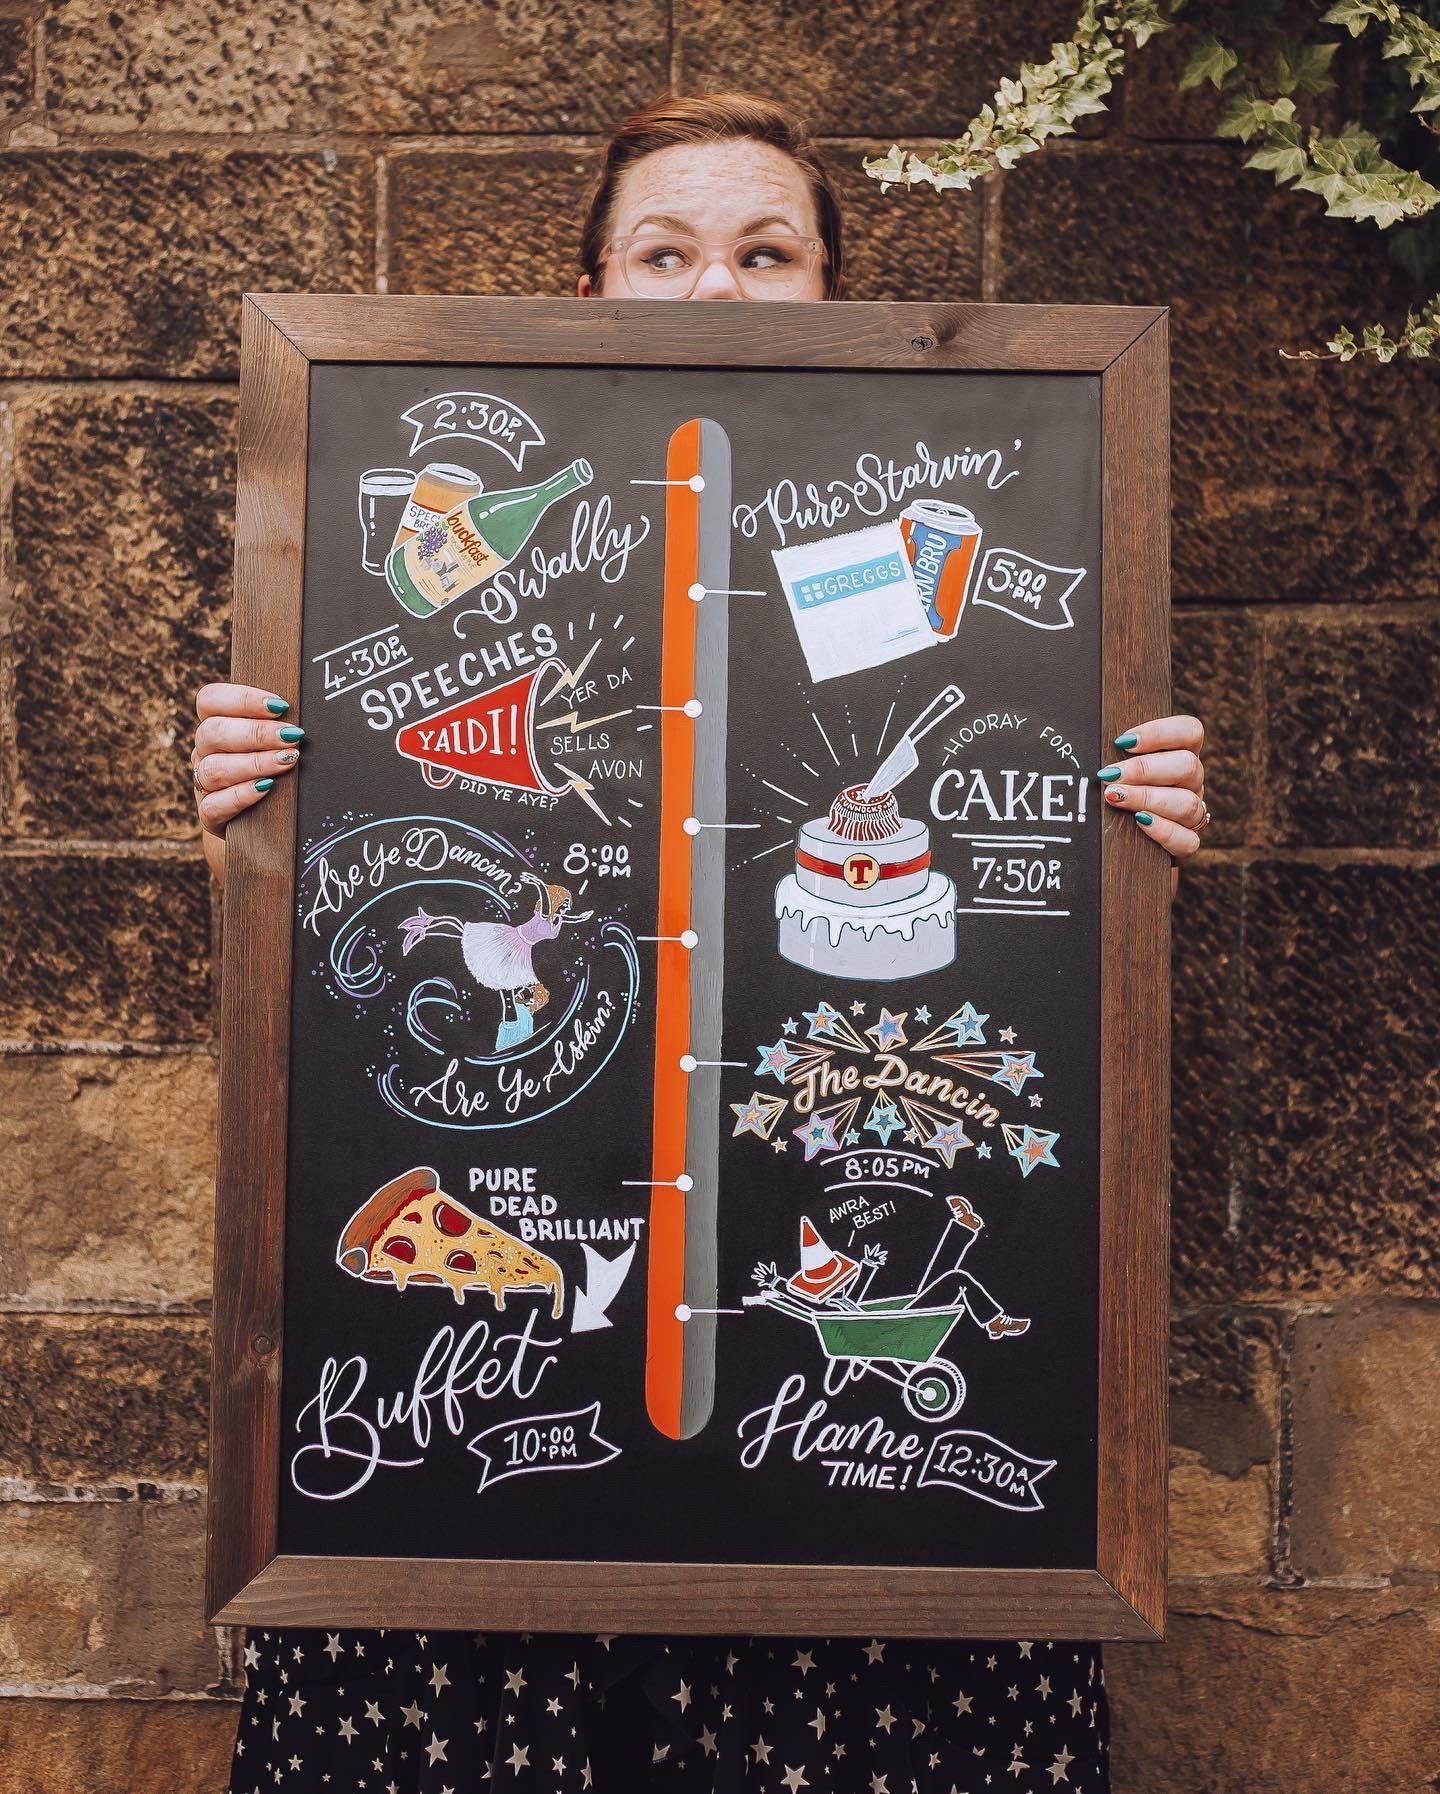  A person stood in front of a wall is holding up the wooden framed chalkboard plan of the day. The portrait board has a timeline down the middle and various parts and timings of the day listed from it with a drawing associated with what is happening 